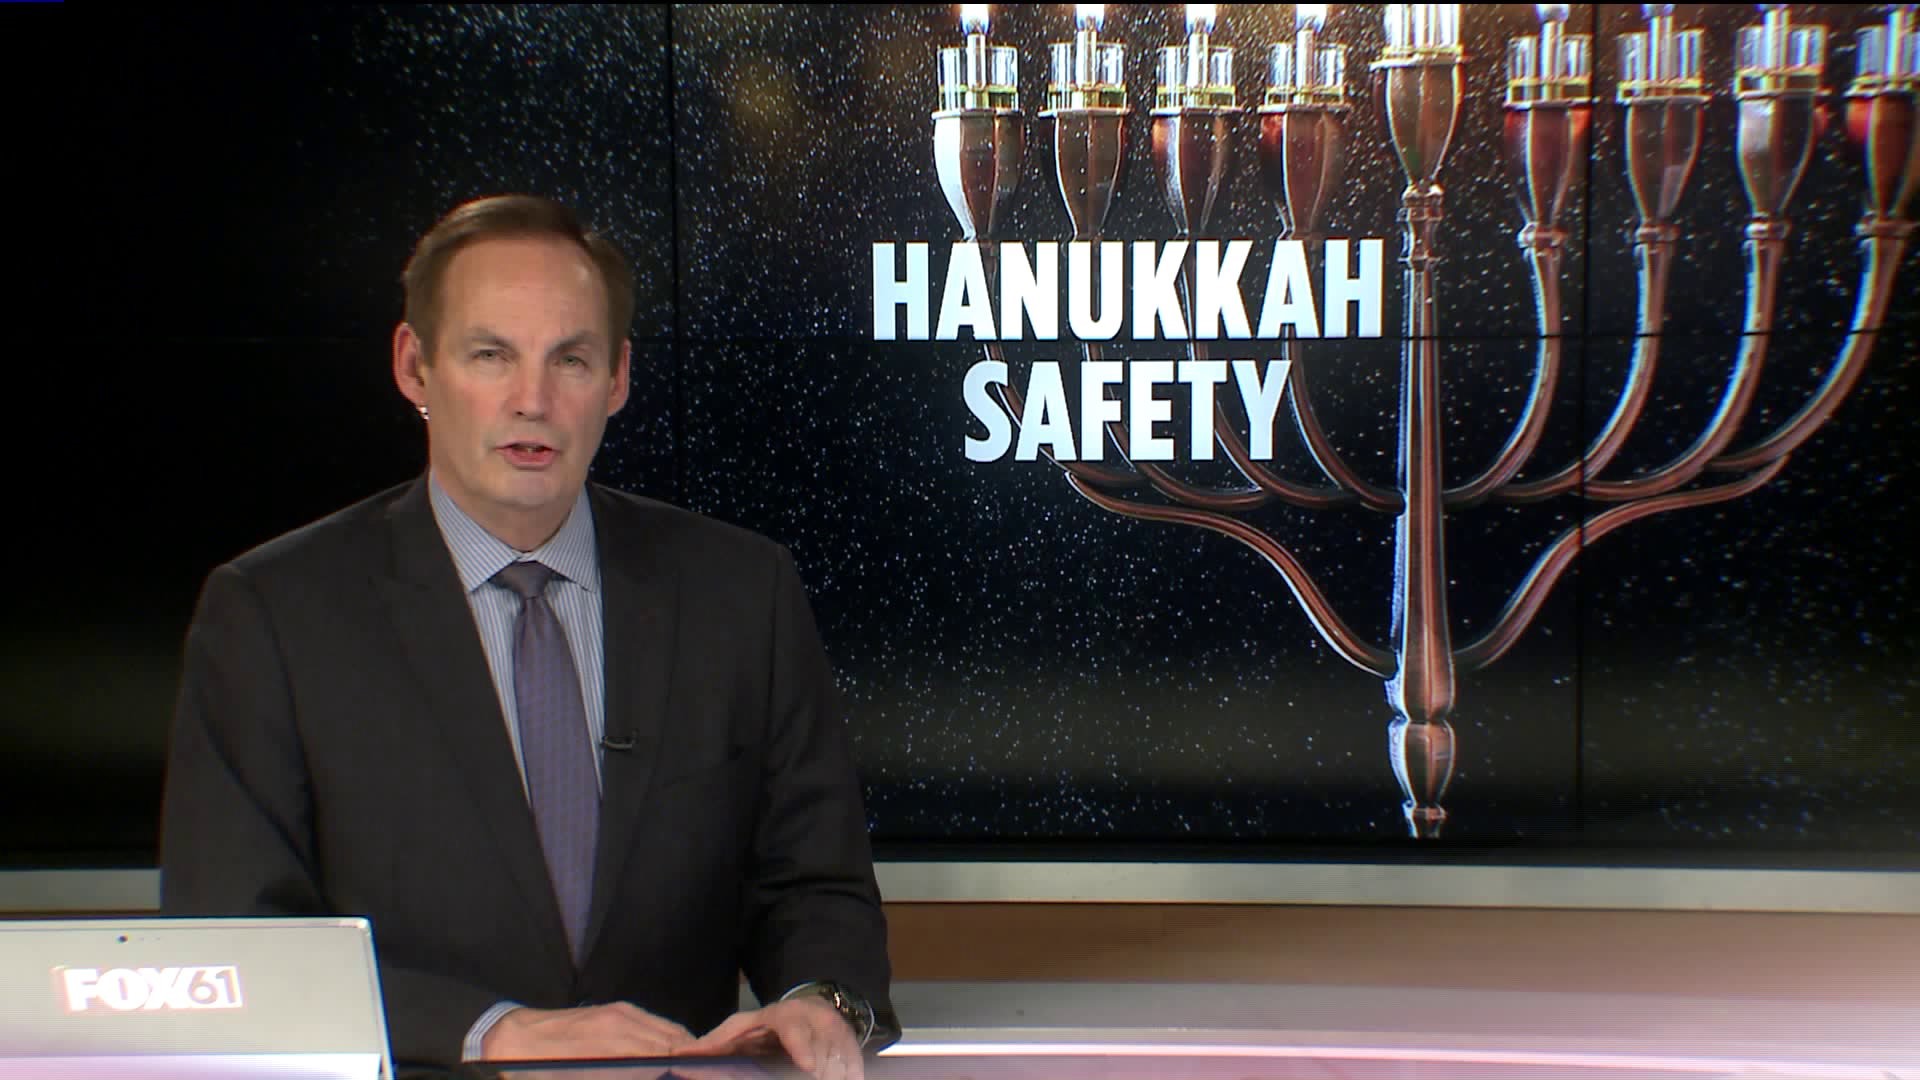 With Hanukkah beginning, thoughts turn to security